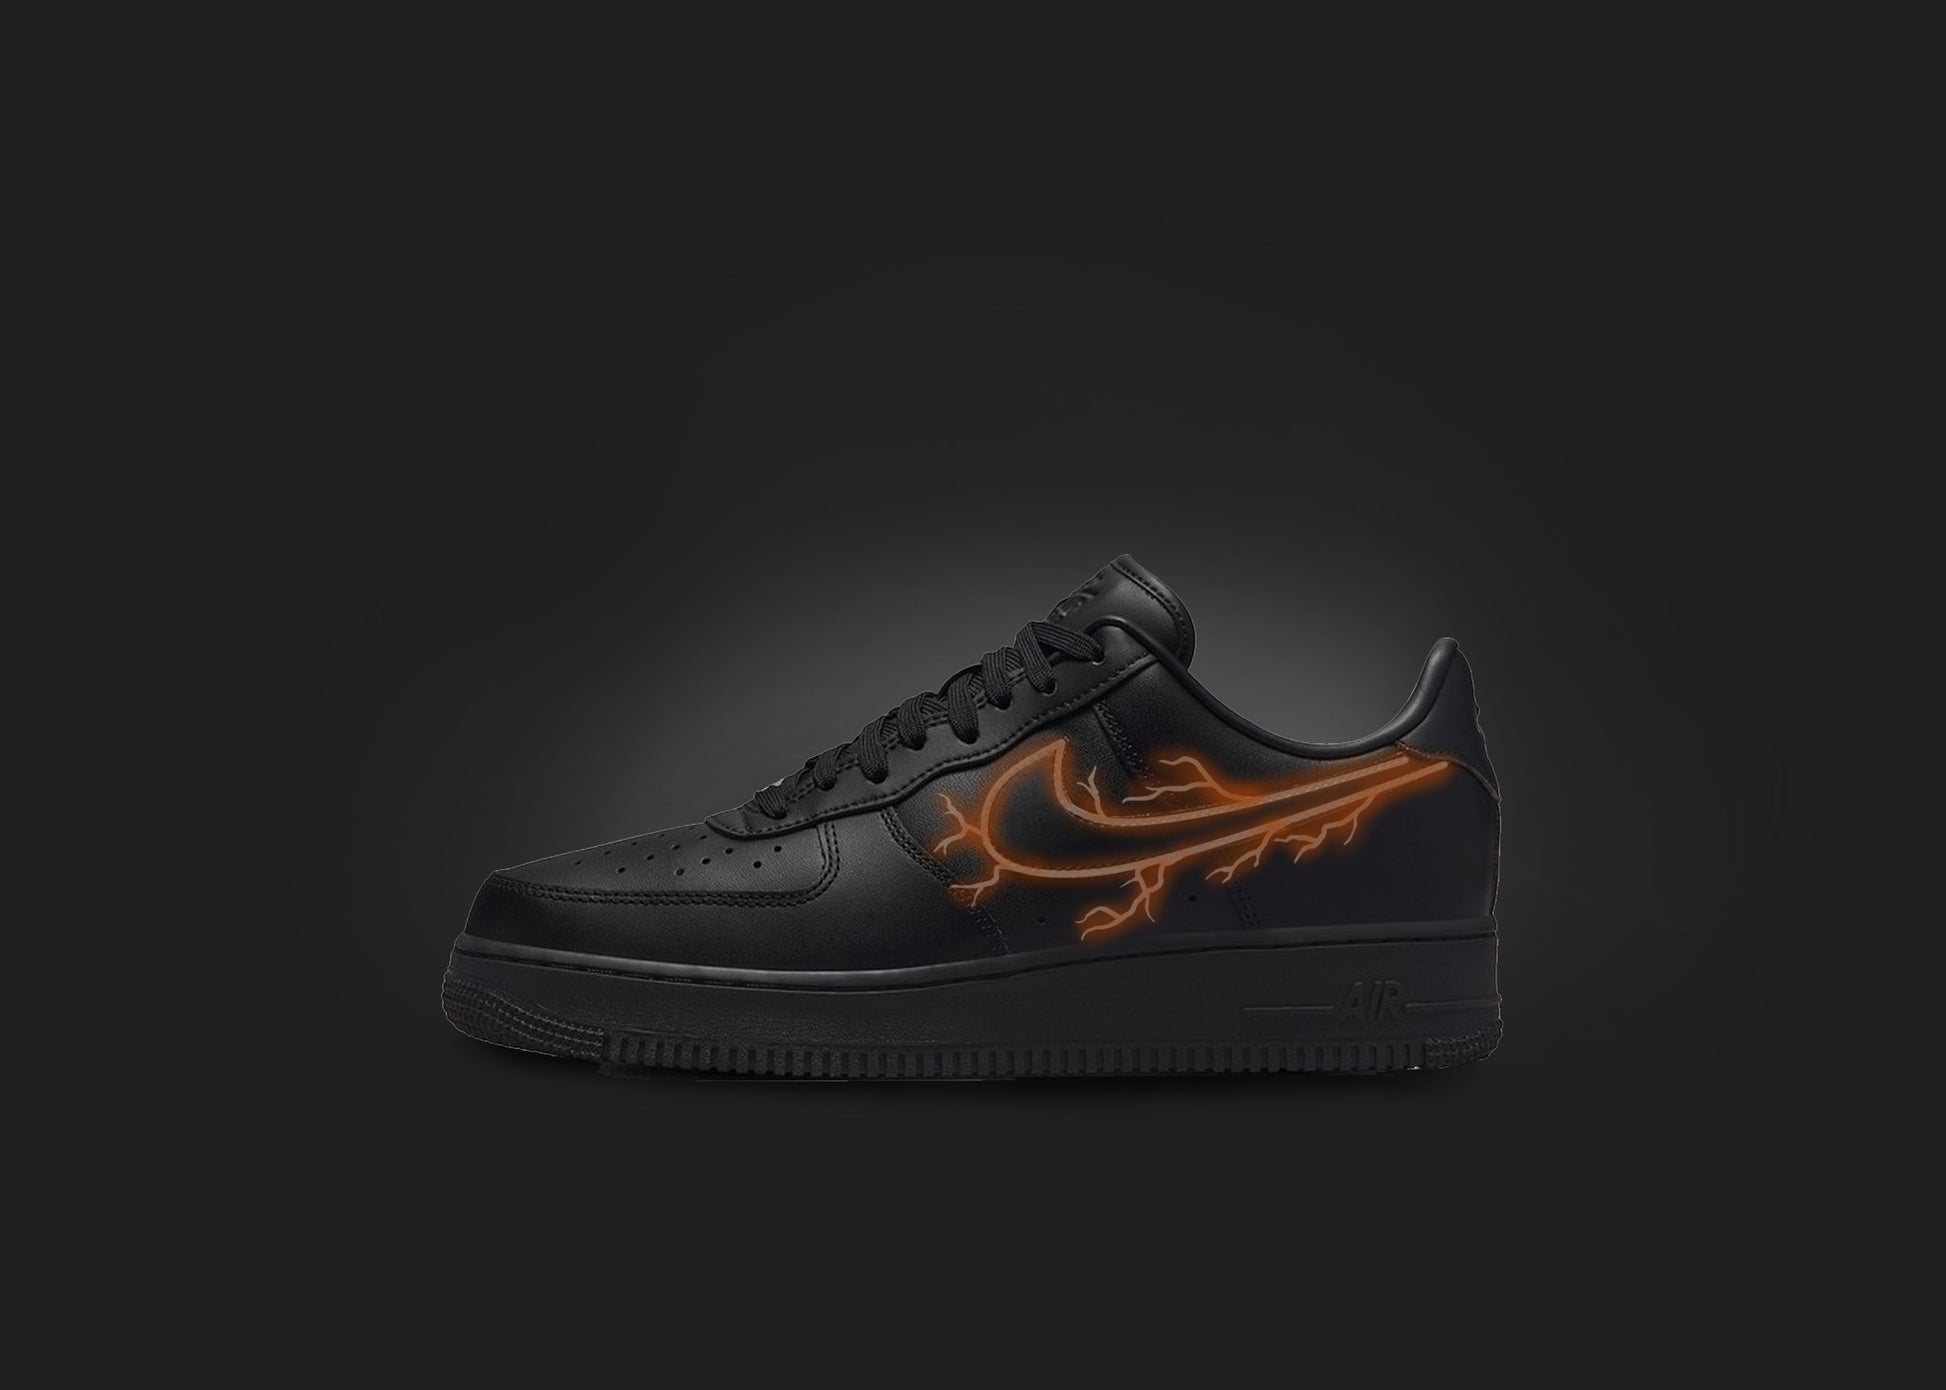 The image is featuring a custom black Air force 1 sneaker on a blank black background. The black nike sneaker has a orange lightning design on the nike logo. 